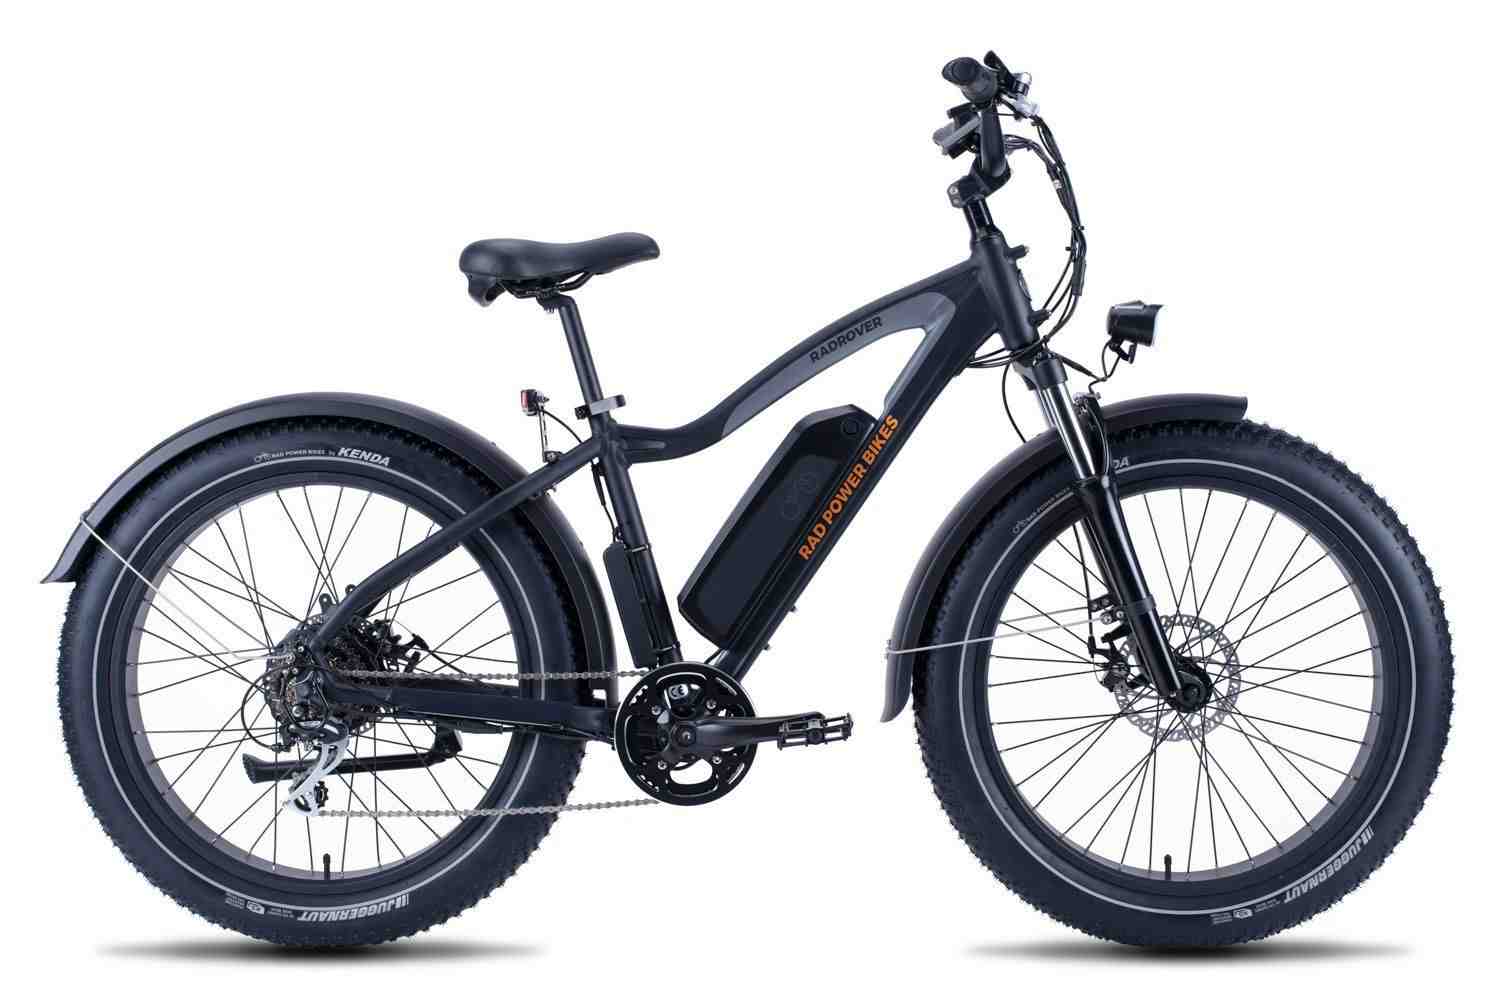 Are fat tires better for eBike?